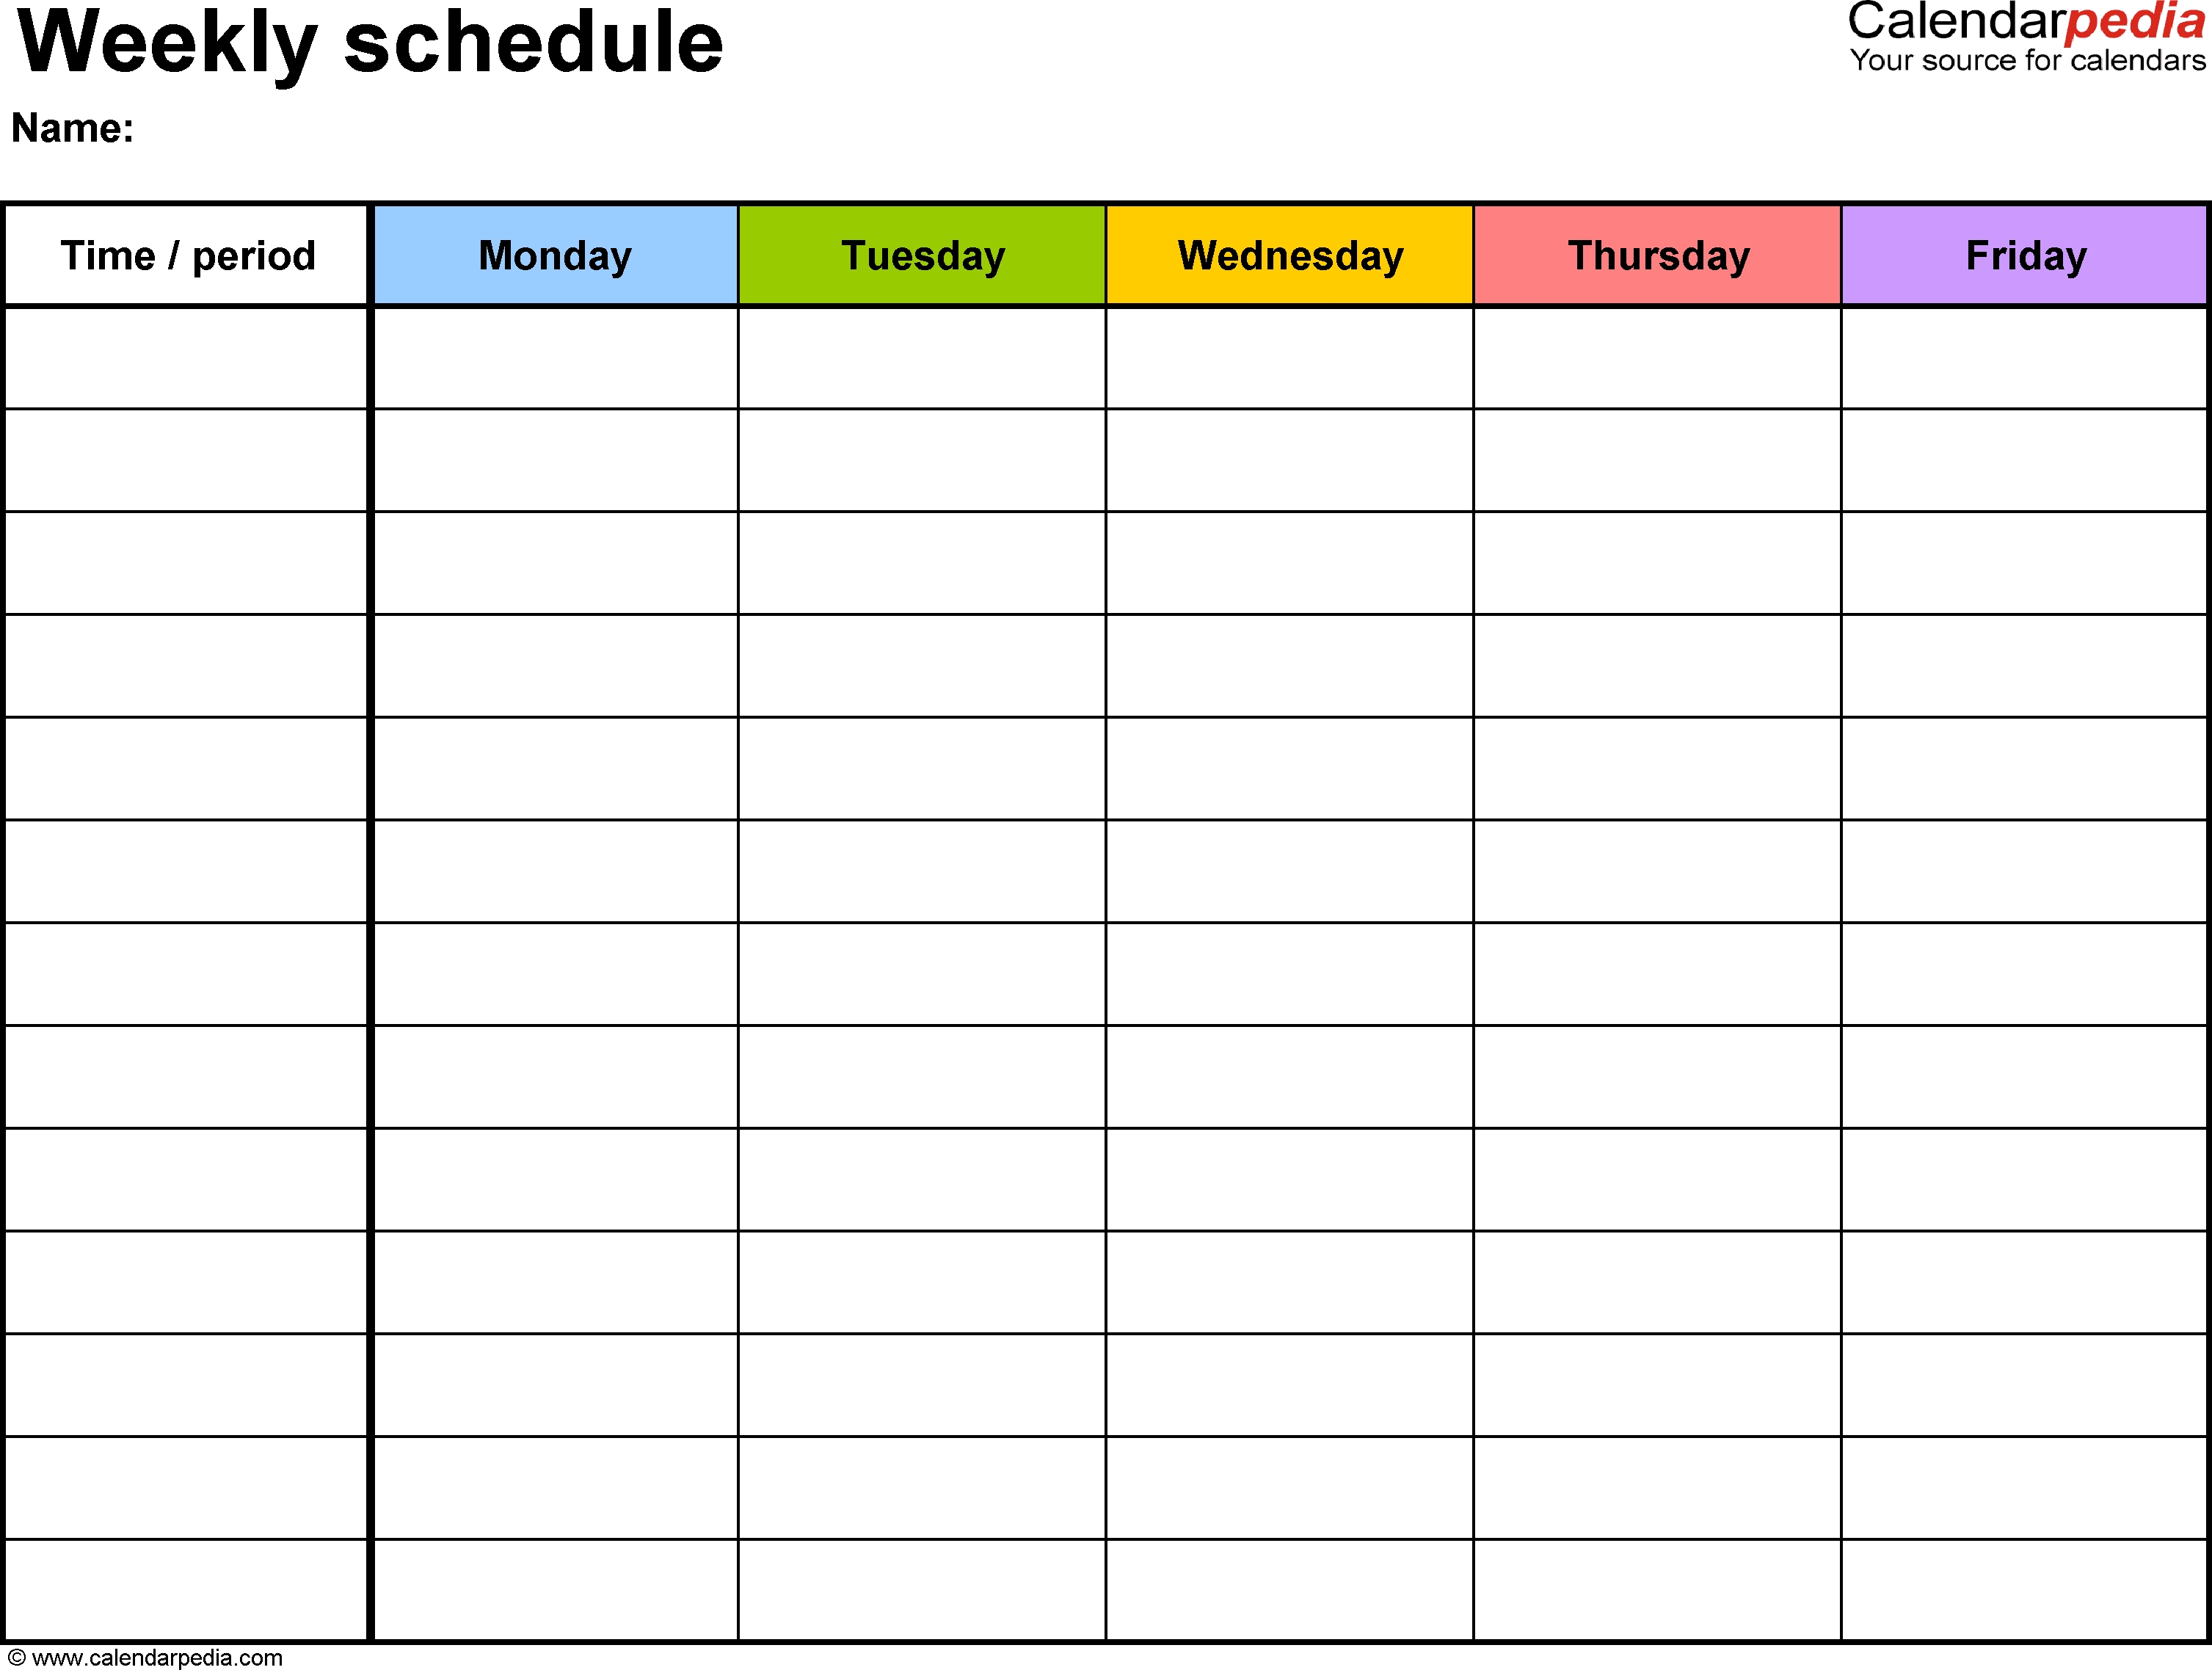 Free Weekly Schedule Templates For Word - 18 Templates M-F Weekly Calendar Template